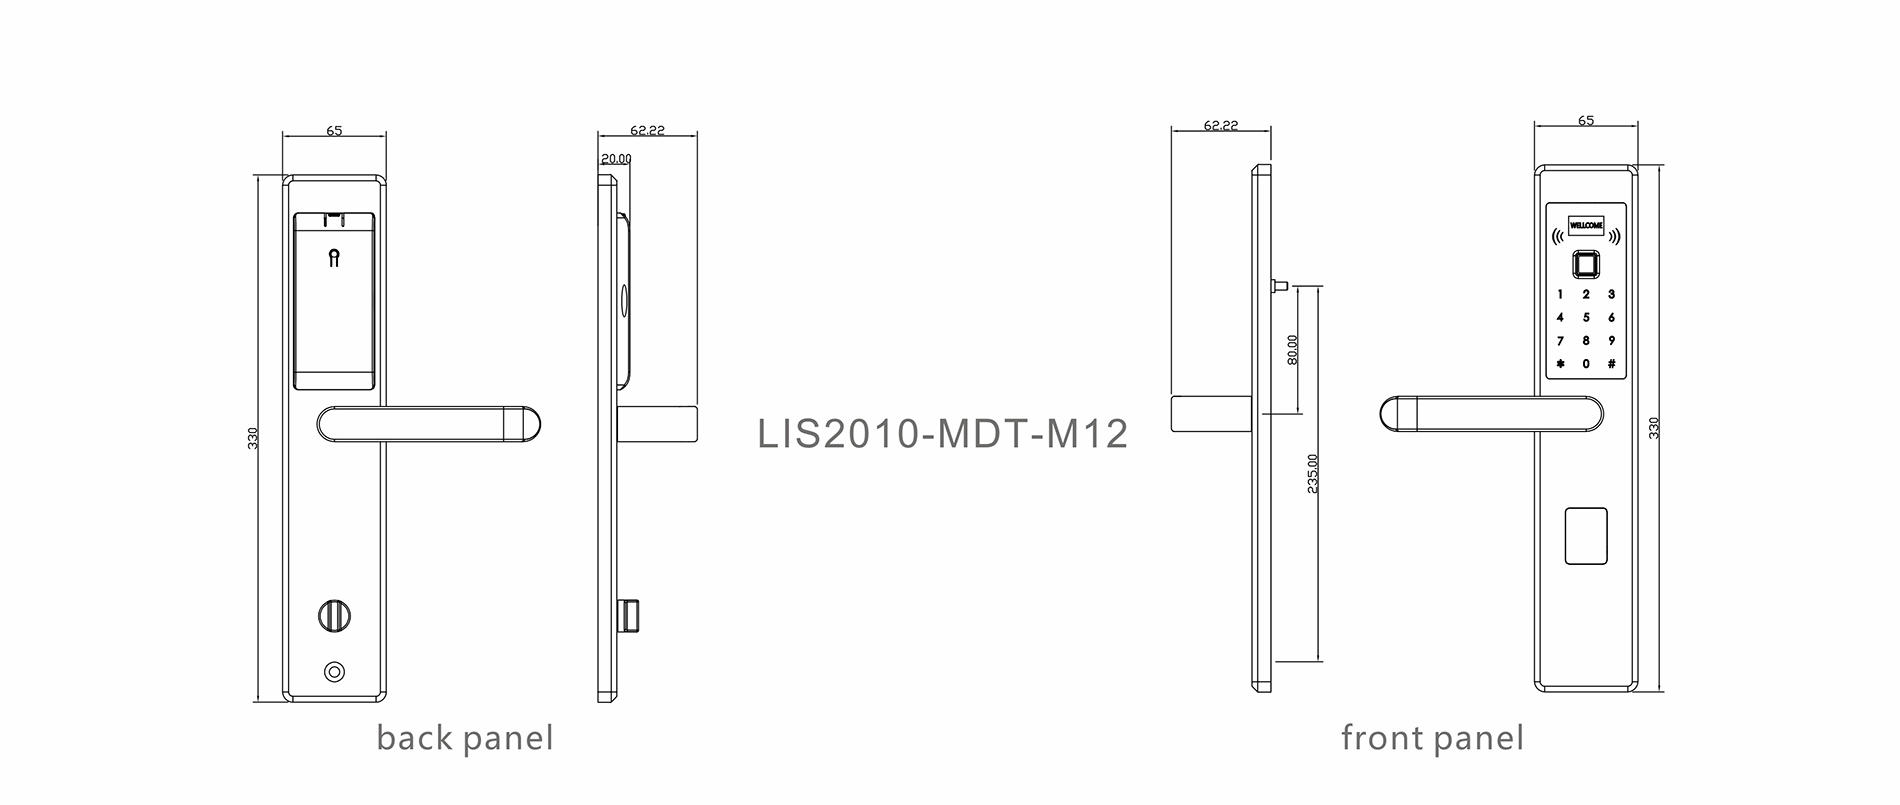 Level mdt1380 touch keypad lock factory price for home